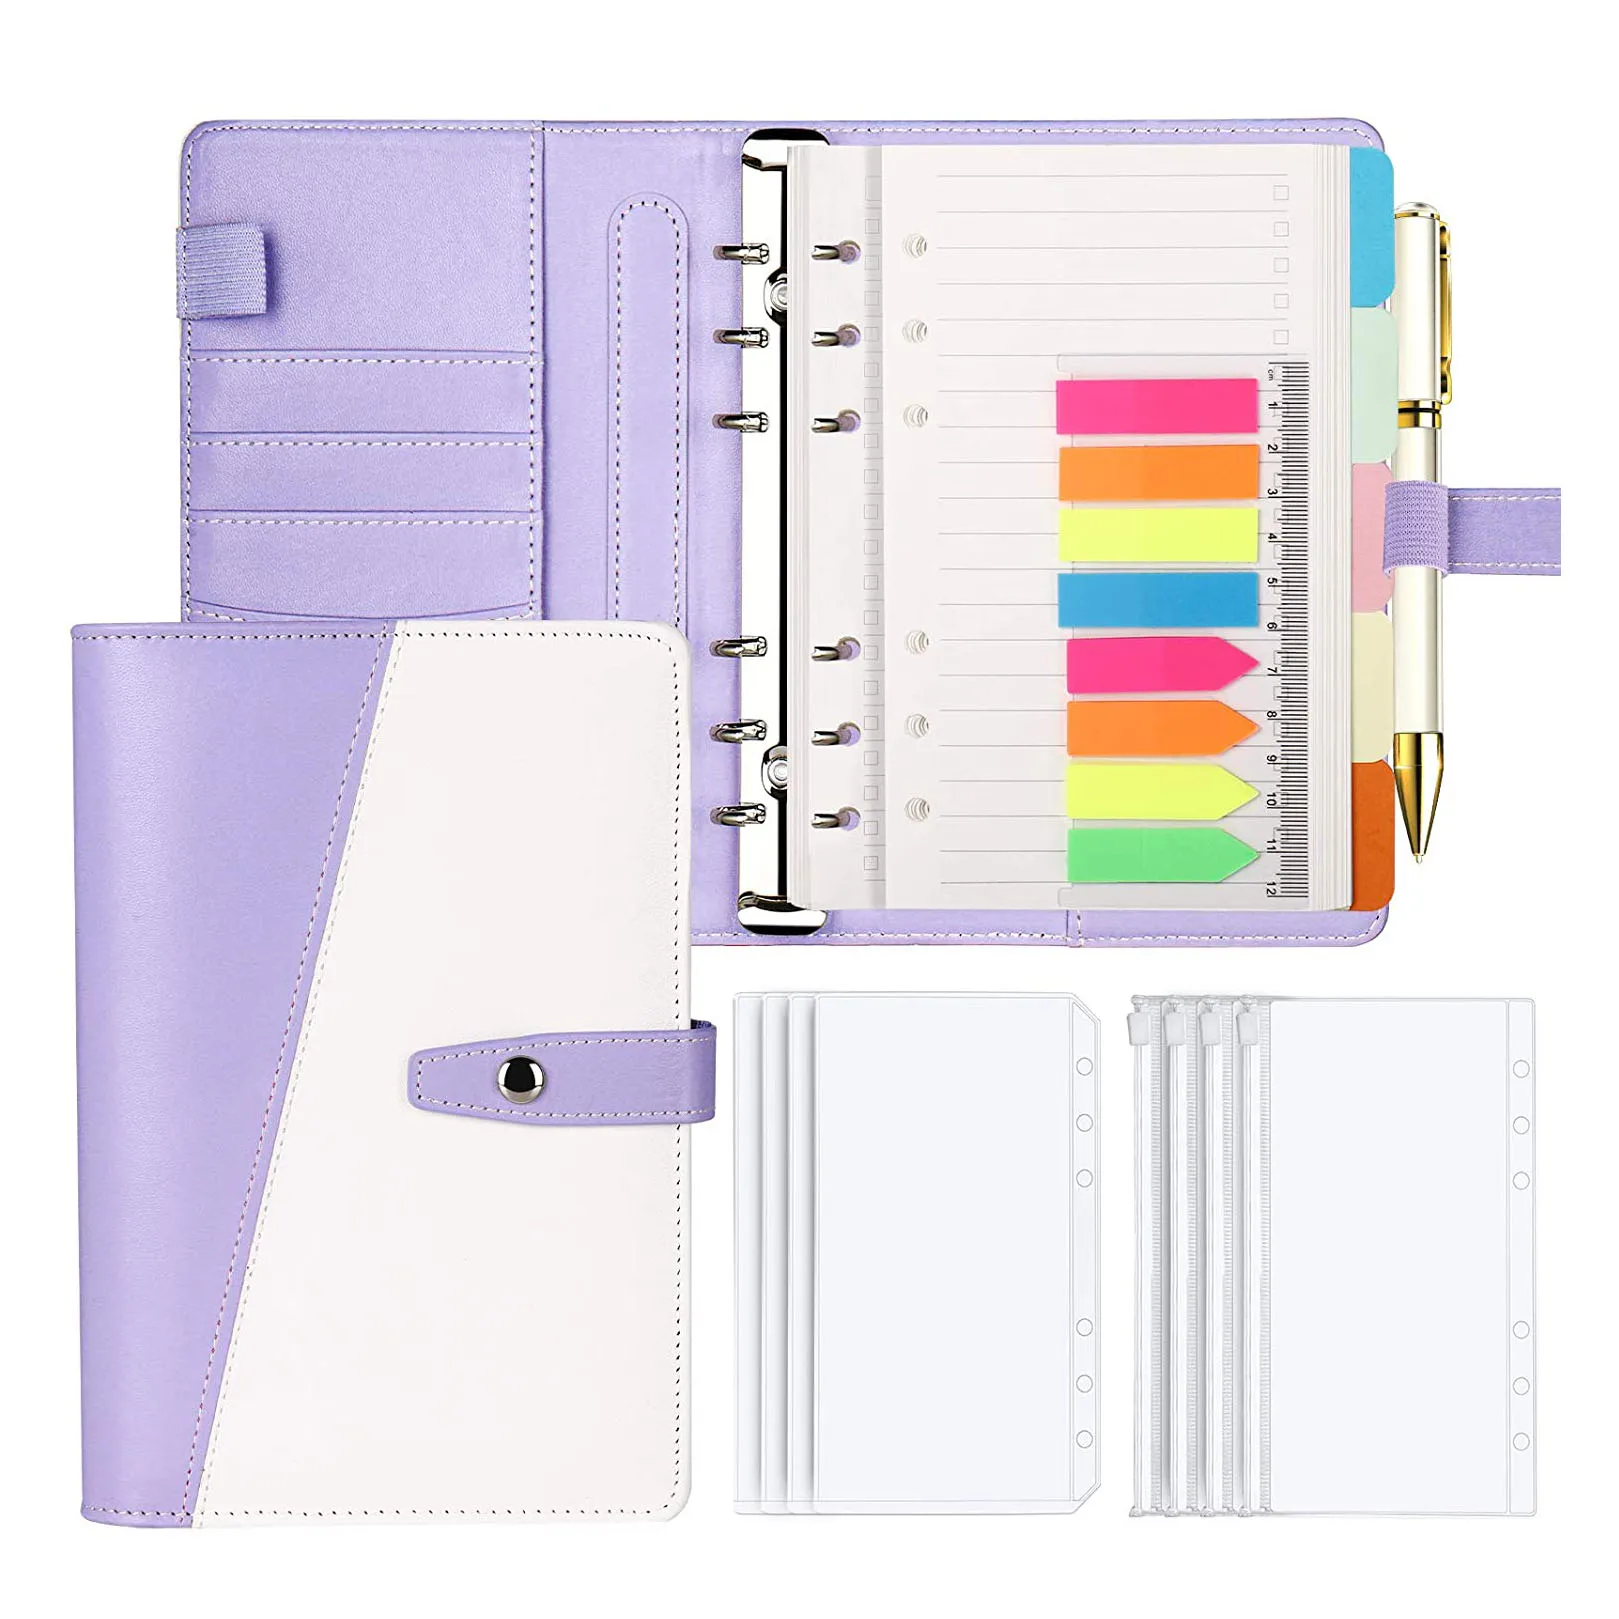 15 Pieces A6 PU Leather Notebook Binder Budget Planner Envelopes System with Zipper Pockets, Binder Dividers,Neon Page Markers